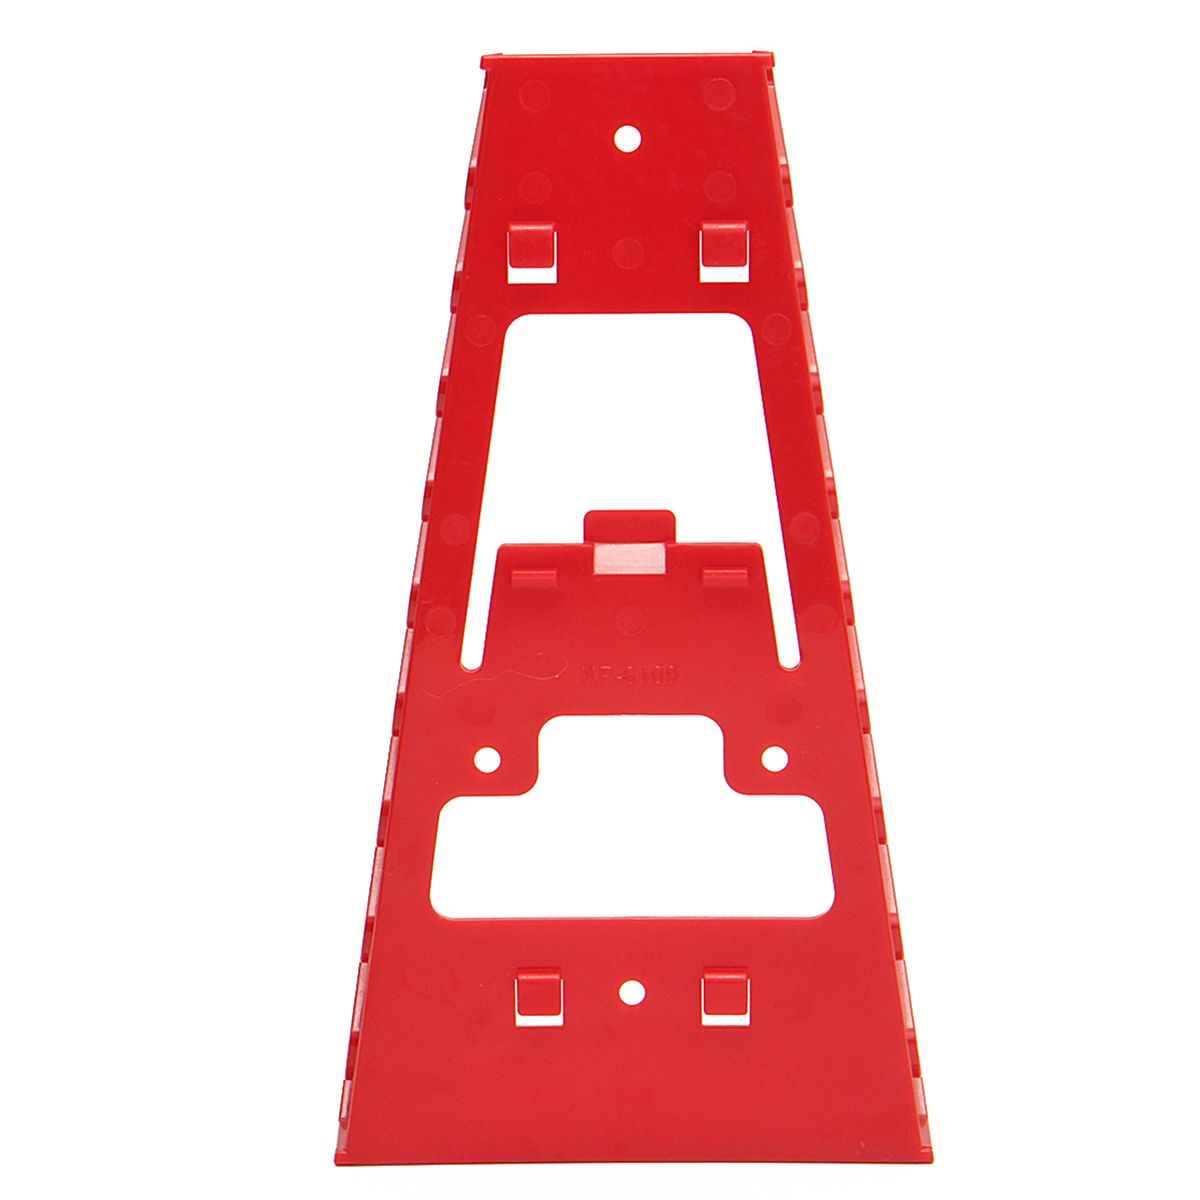 22x12x6cm-Red-Spanner-Rack-Wrench-Holder-Storage-Wrench-Organizer-Tools-1262913